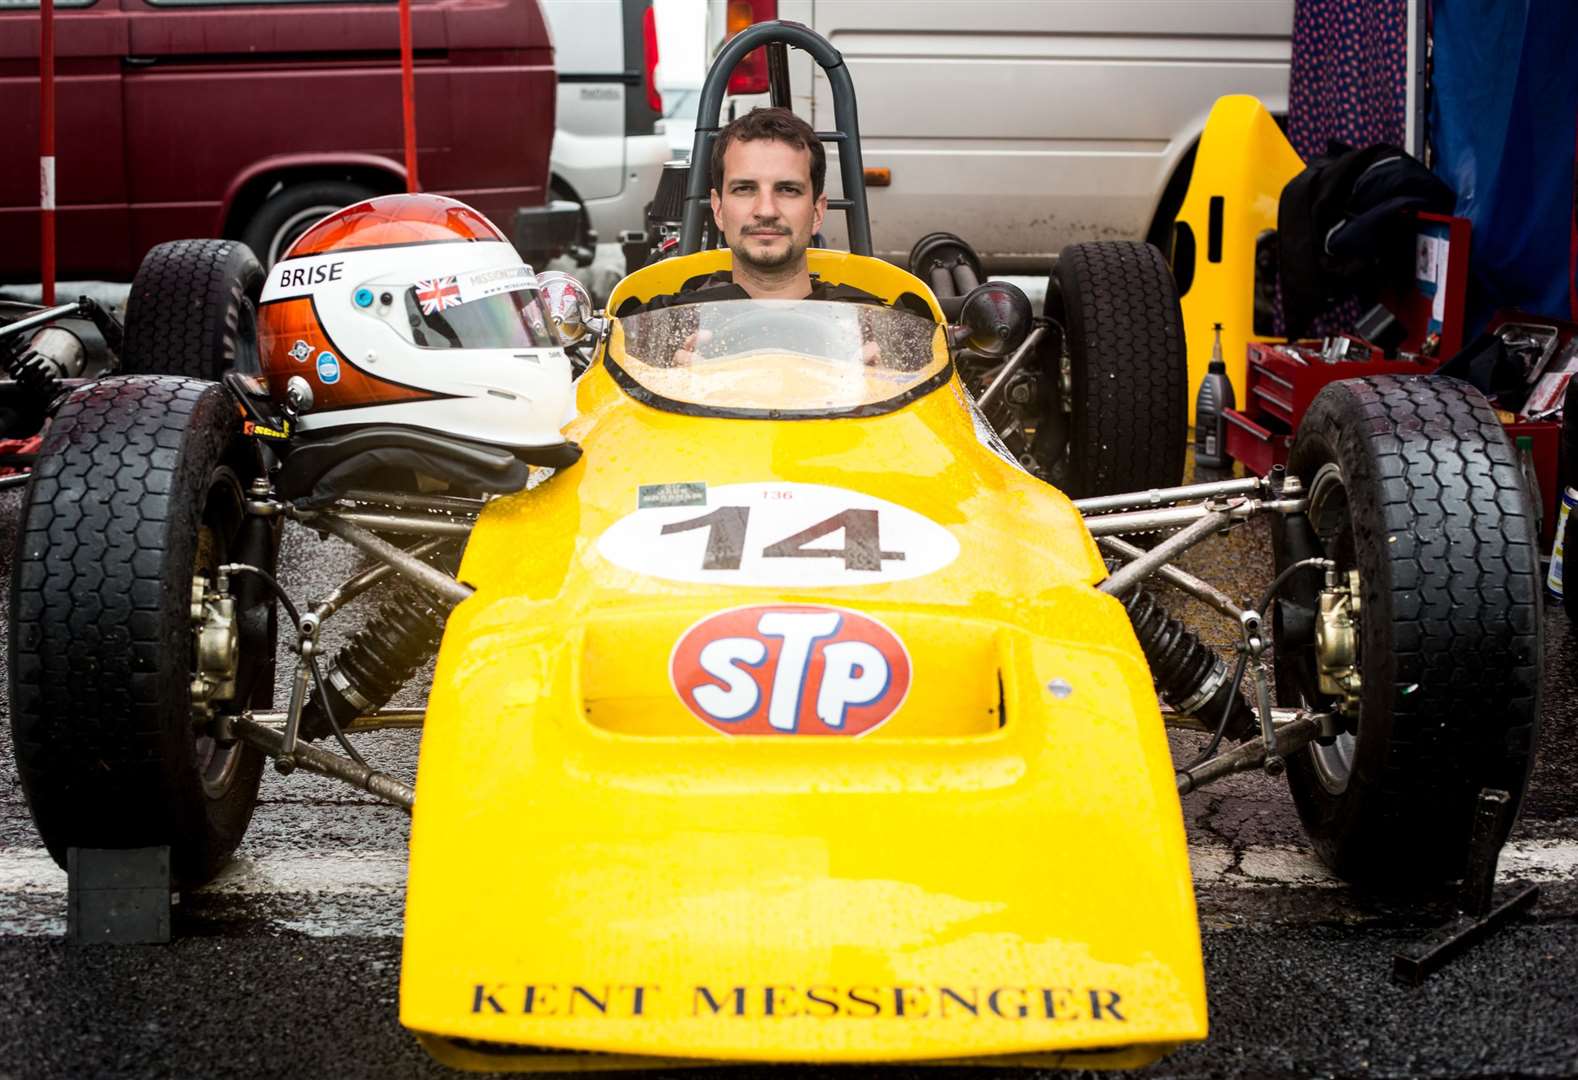 David Brise – Tony's nephew – pictured in the Elden his uncle used to finish second in the 1971 British Formula Ford championship. The car is currently owned by Mike Wrigley. Picture: Ed Robinson/OneRedEye